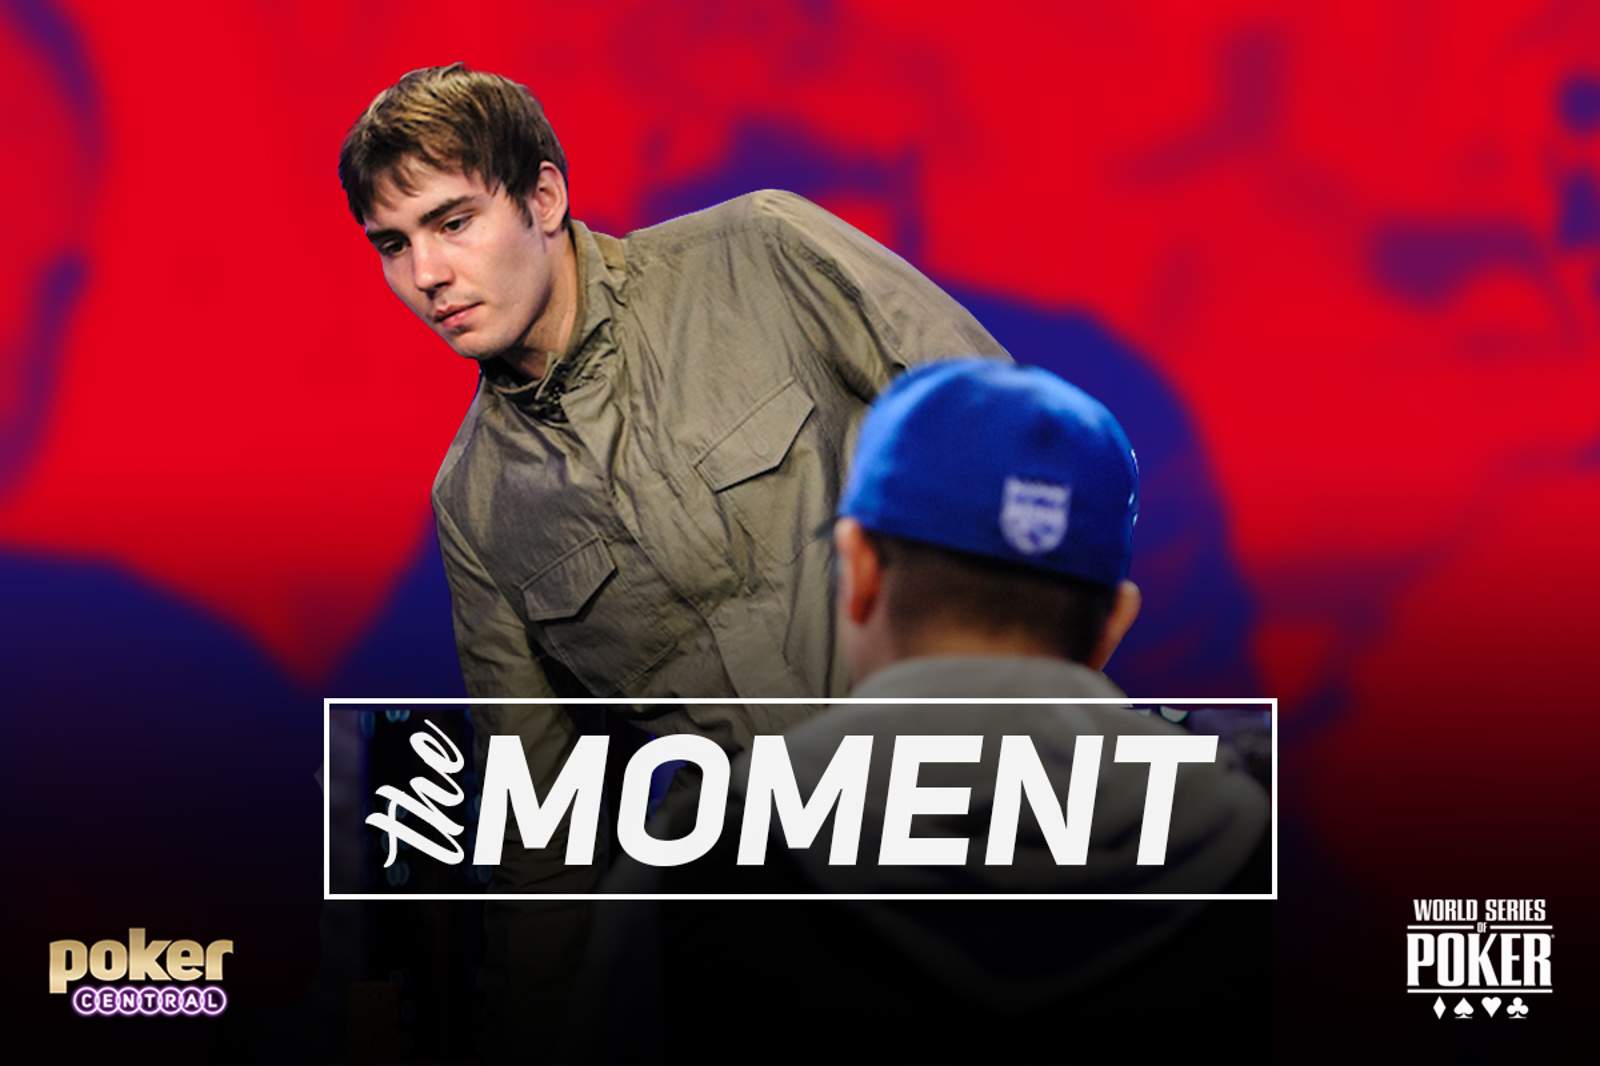 The Moment: Morgenstern's Monumental Blowup